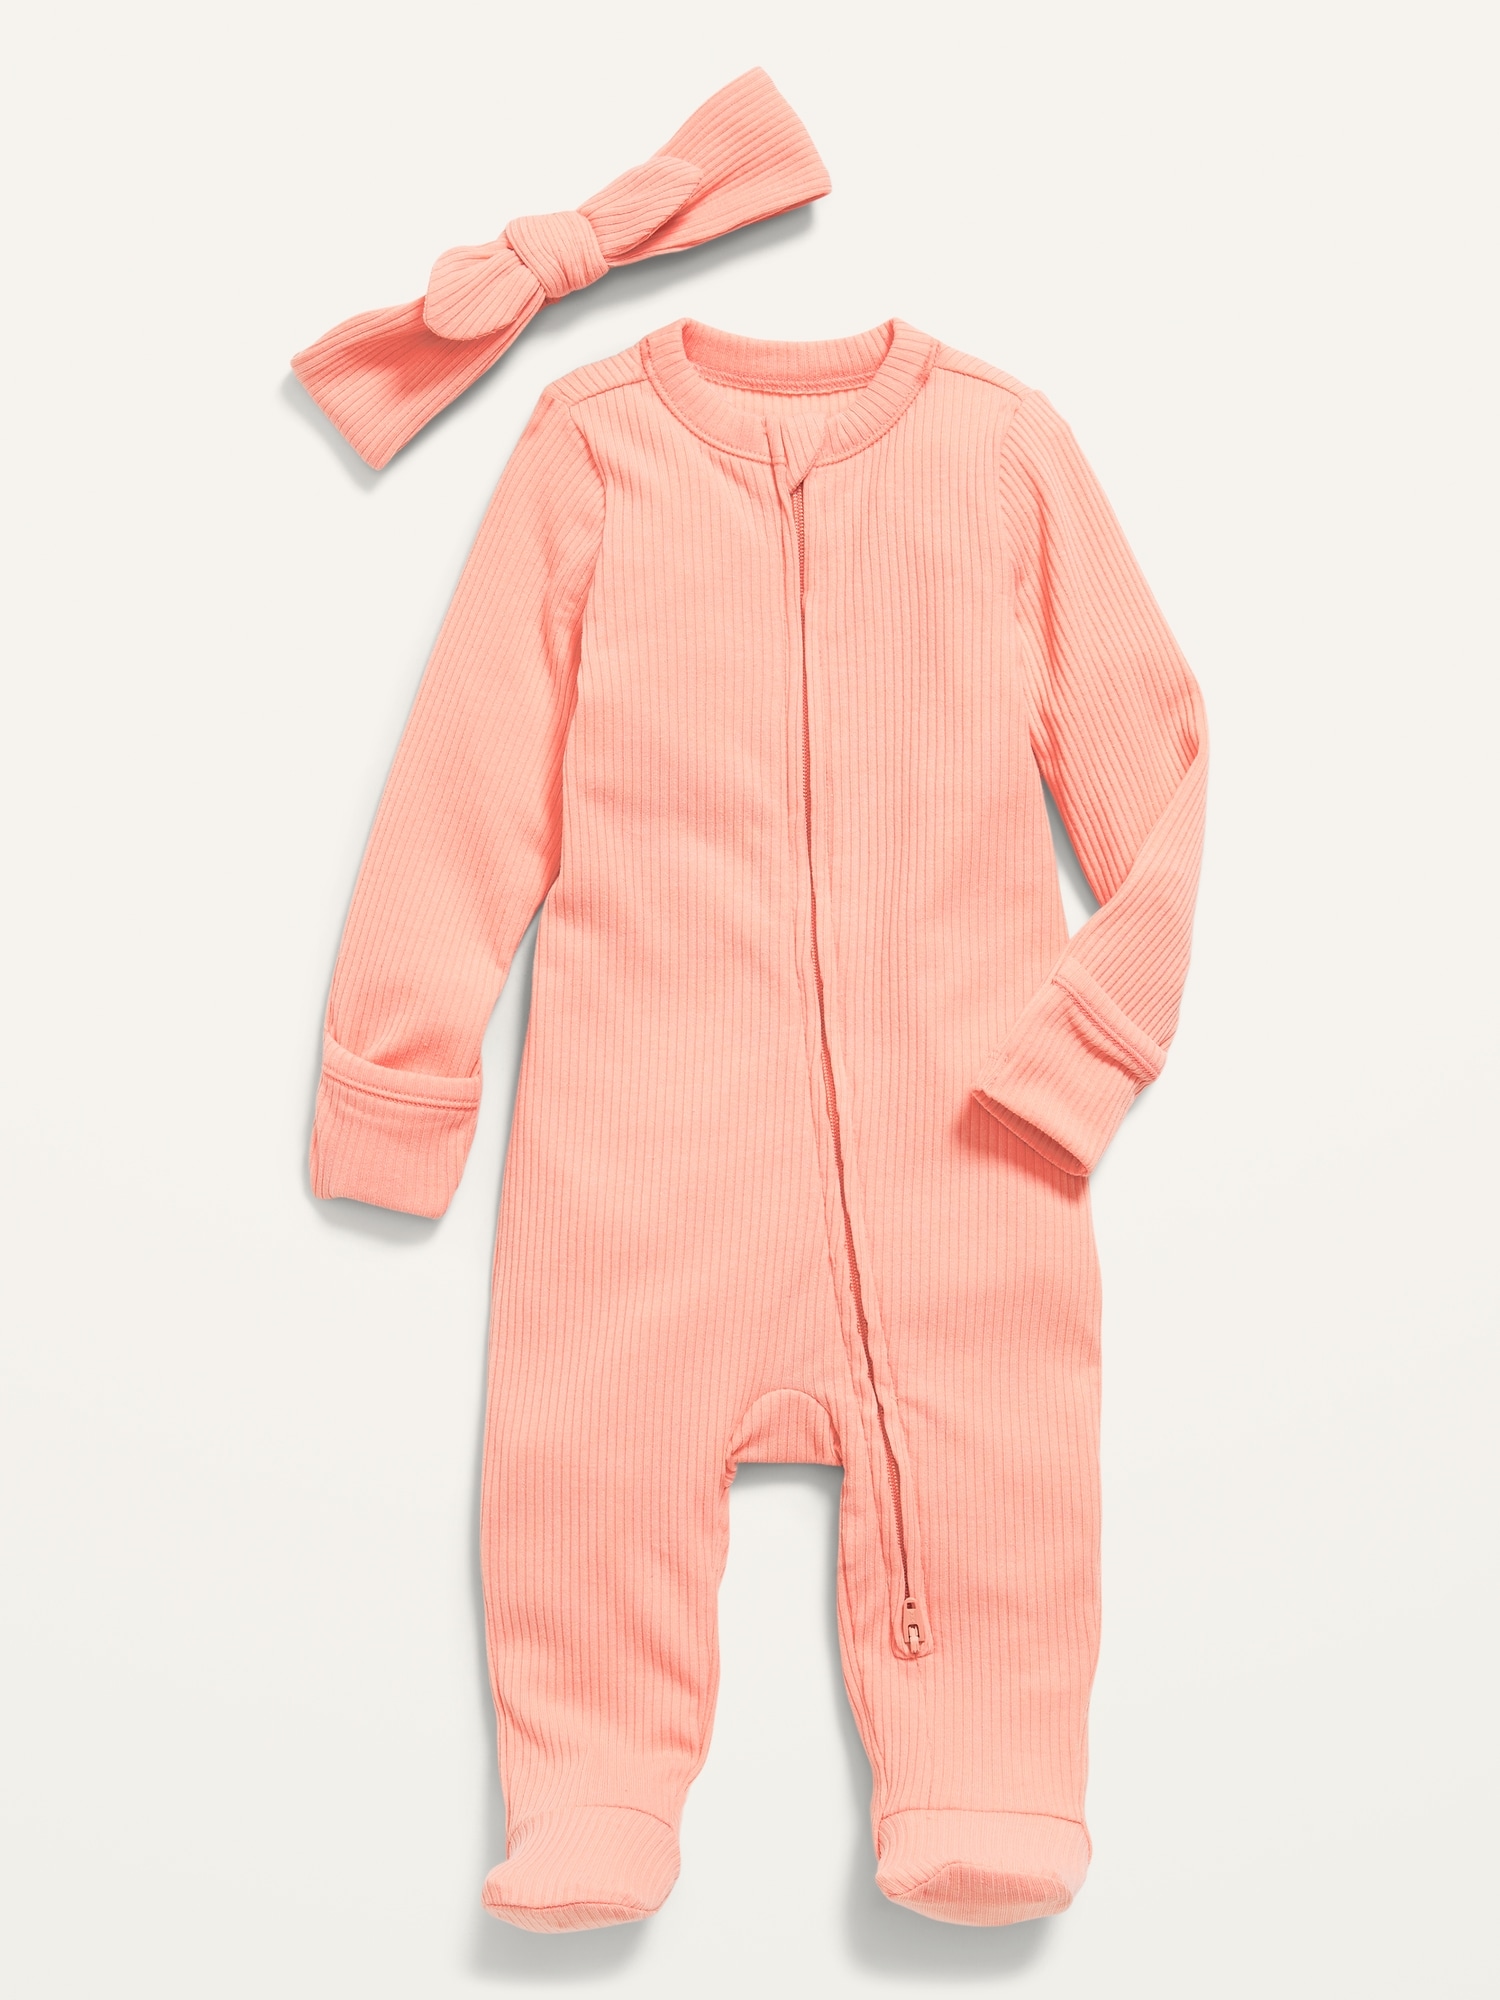 Old Navy Unisex Sleep & Play 2-Way-Zip Footed One-Piece & Headband Layette Set for Baby pink. 1